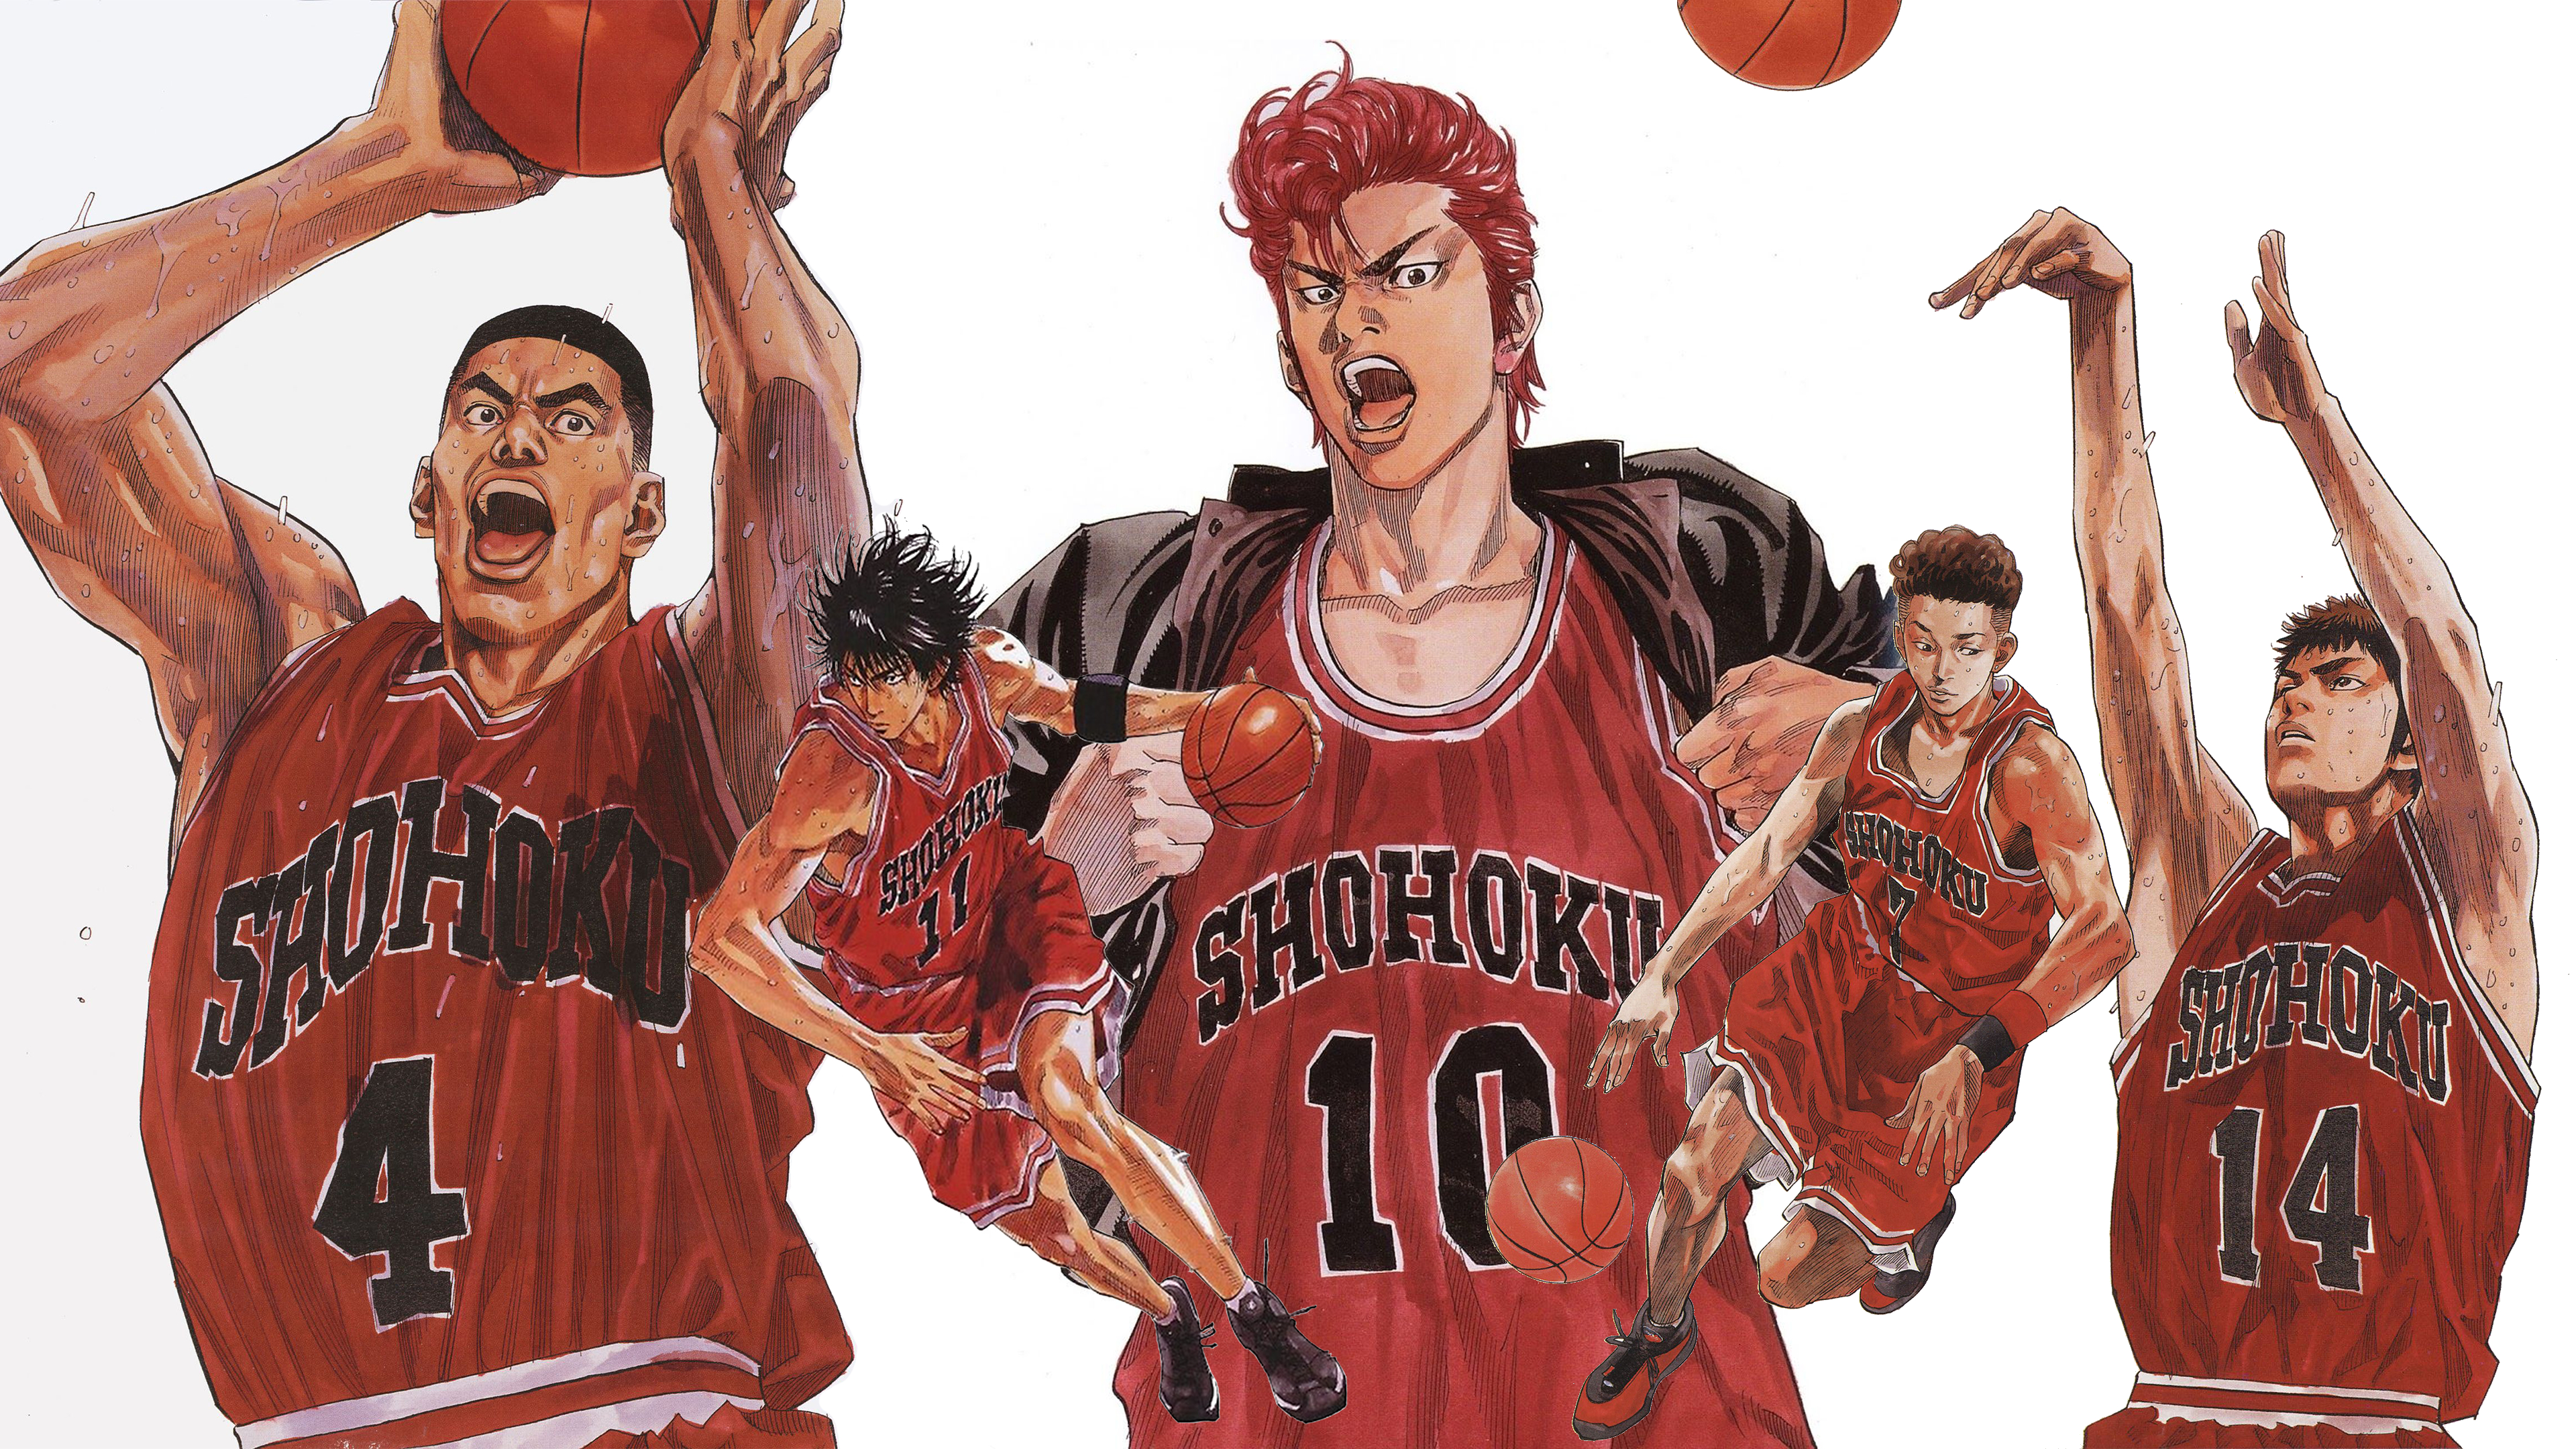 3840x2160 I've noticed that there are very few desktop wallpaper of slam dunk which are both big and pretty so i made one myself. Enjoy this collage! : r/RealSlamDunk